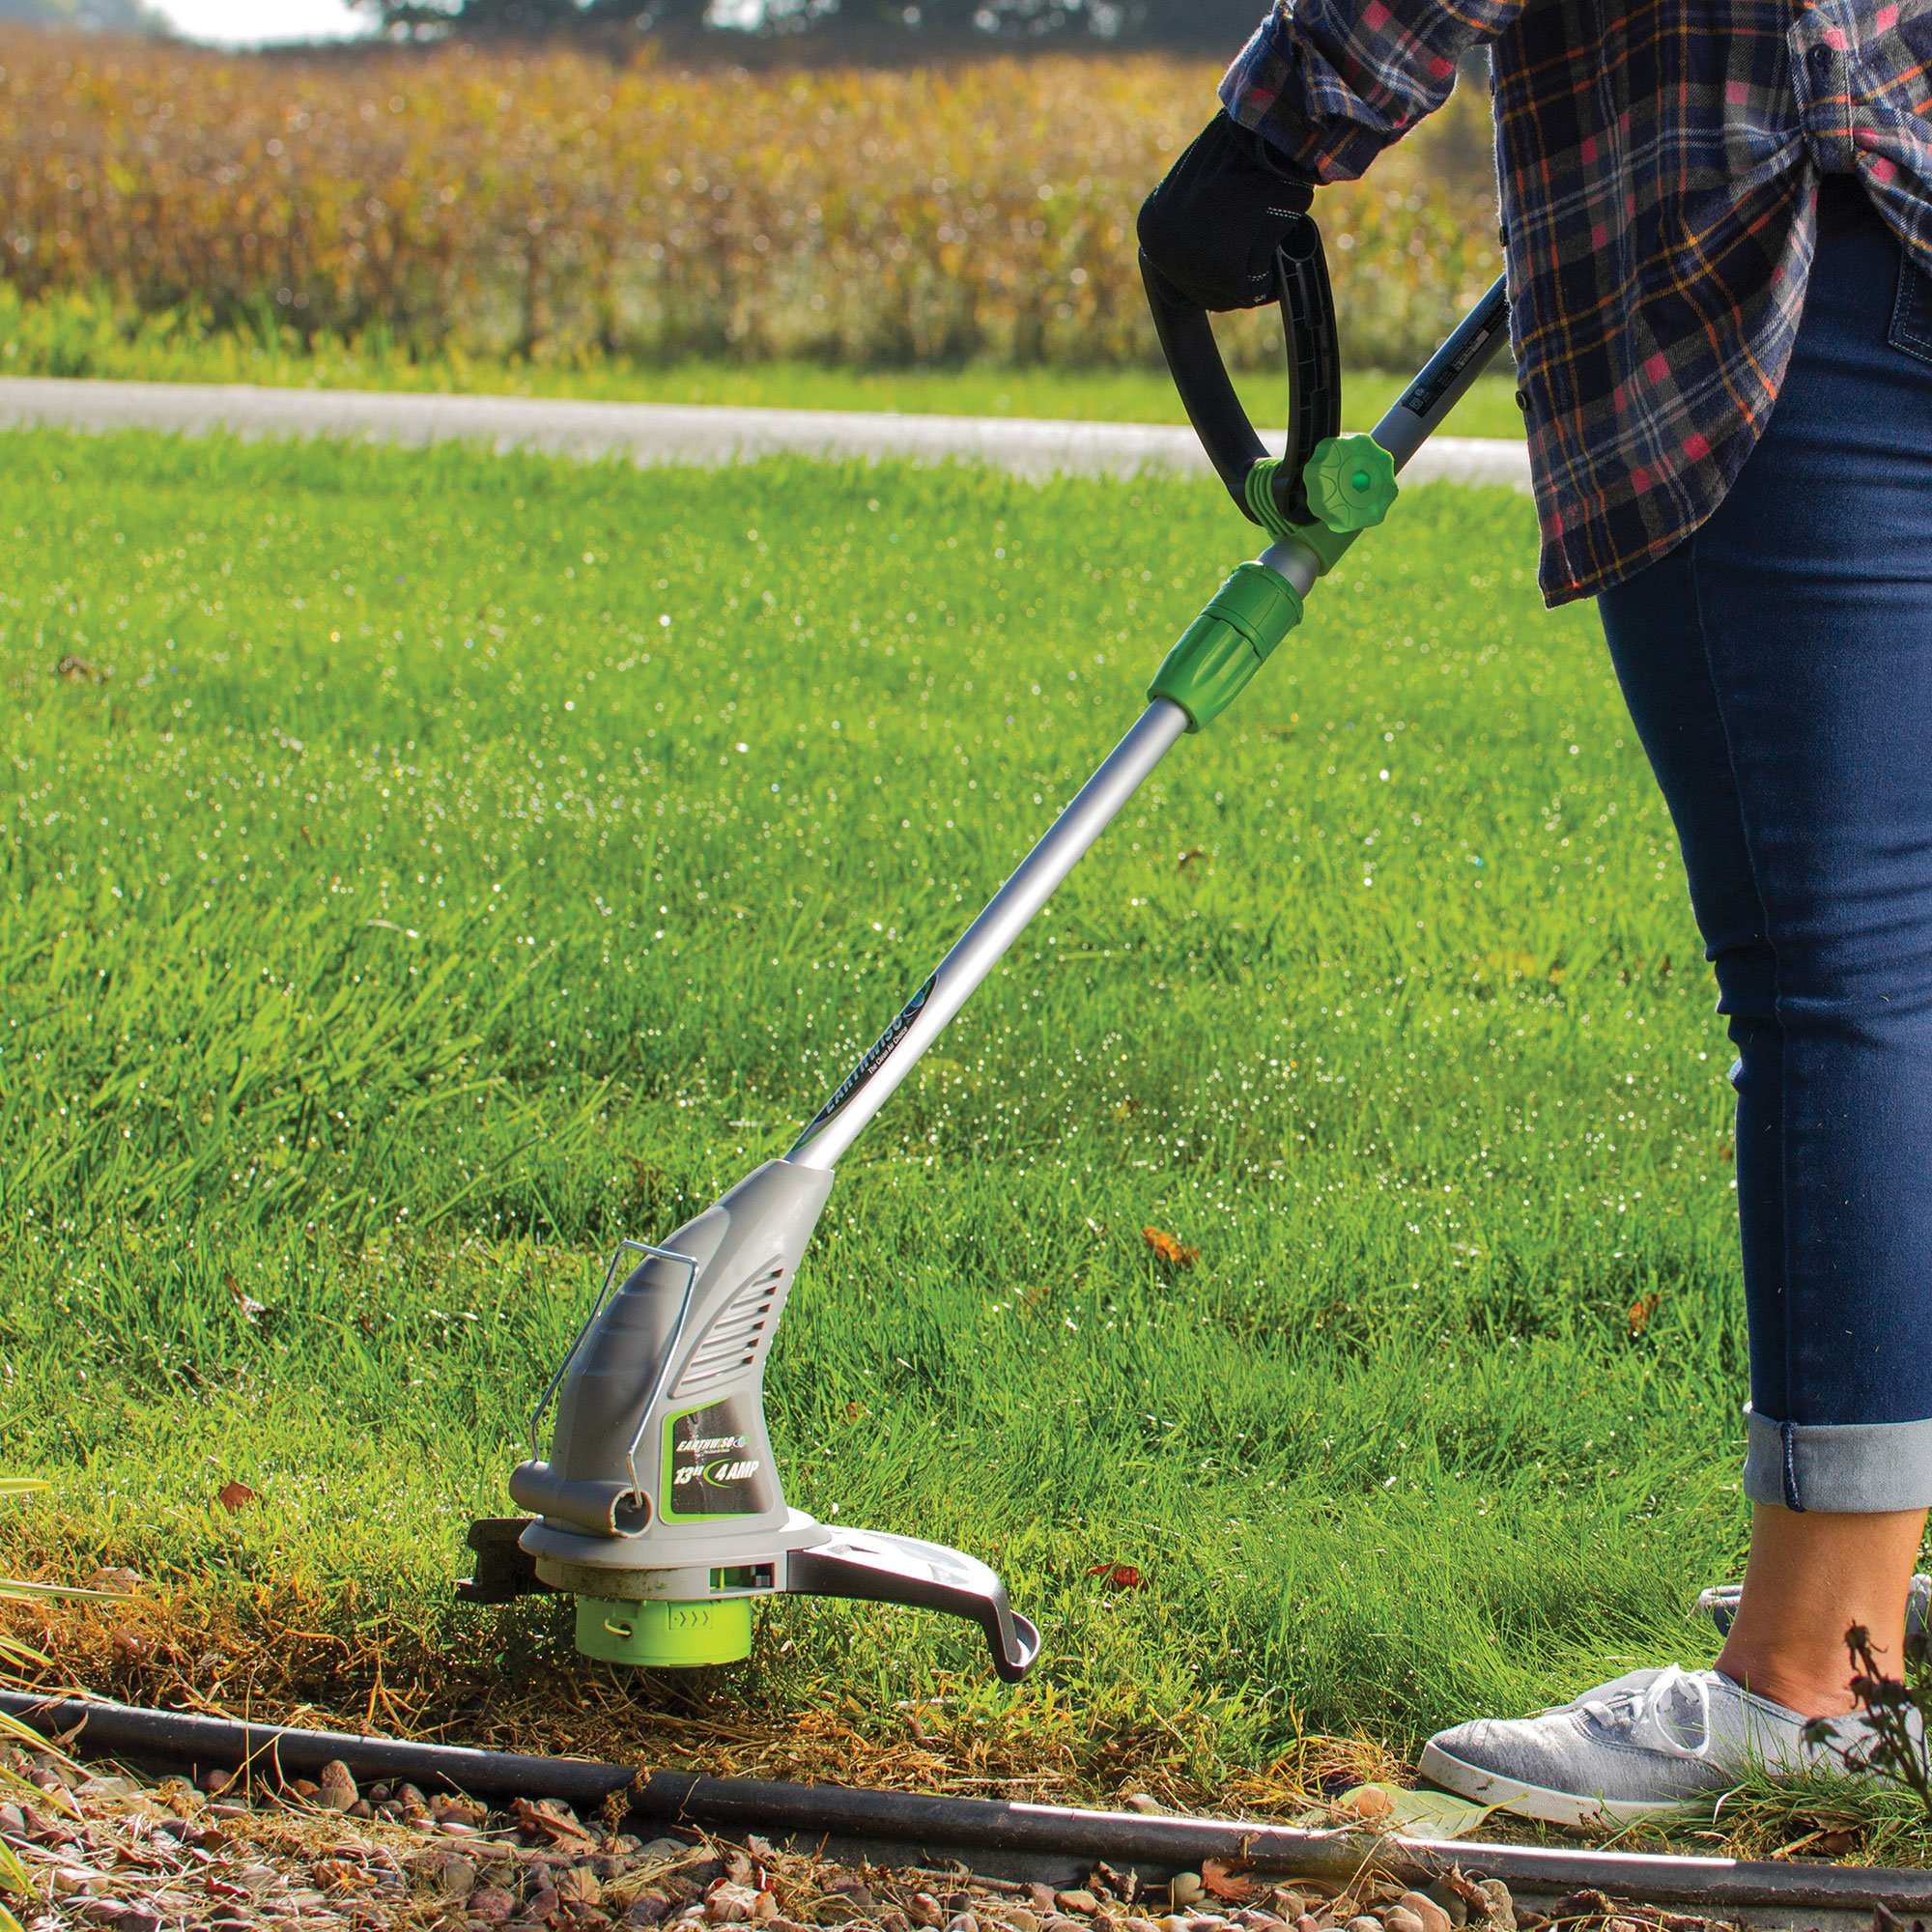 Earthwise 13 Inch 4 Amp Electric String Trimmer